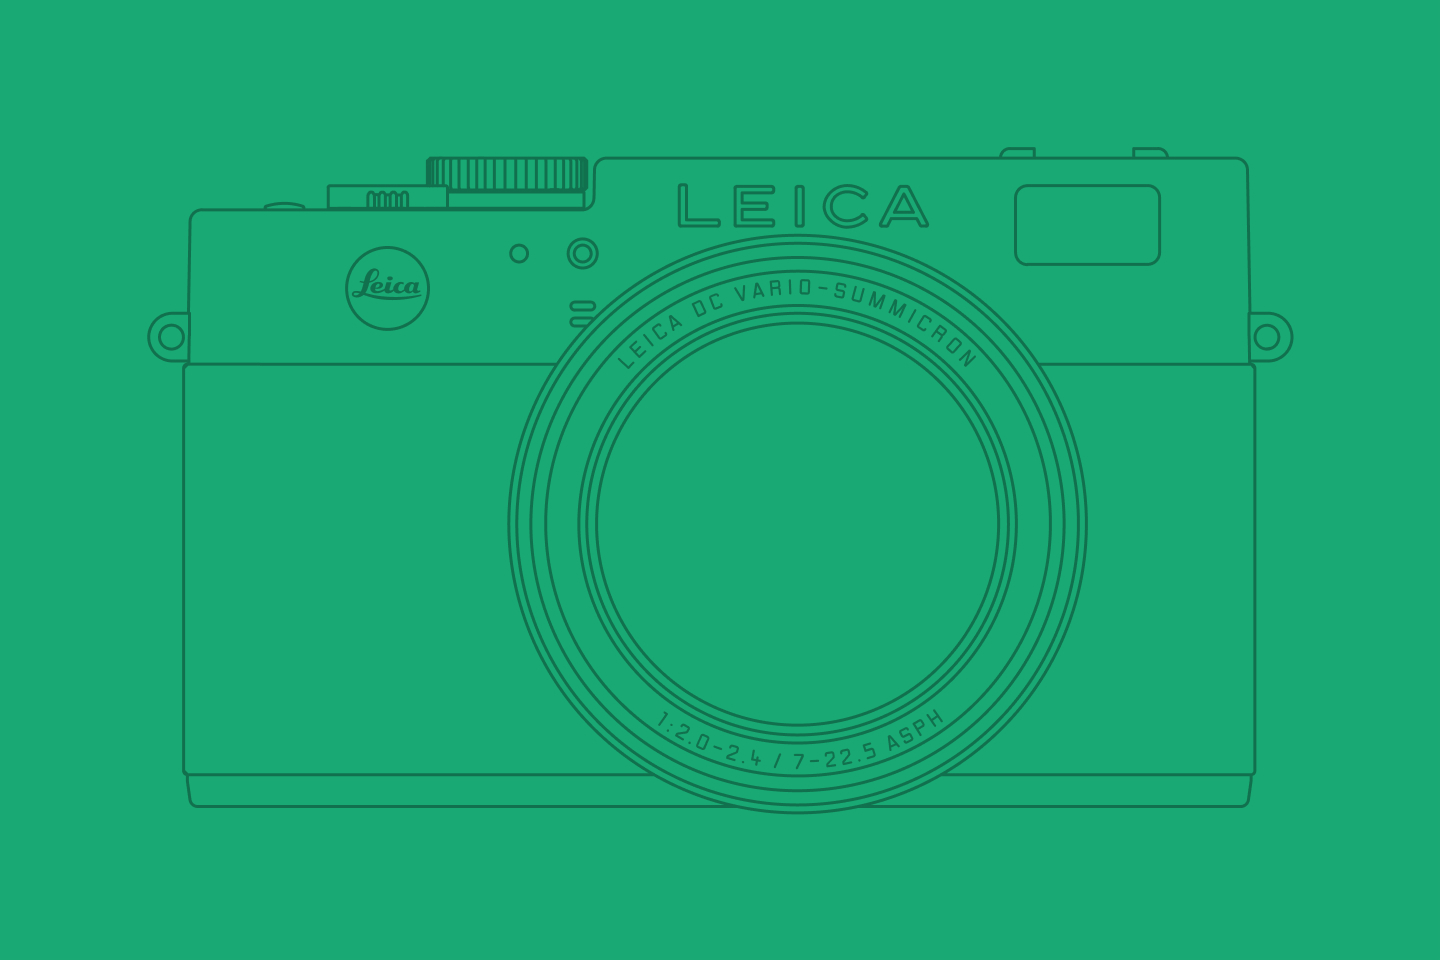 The 16-year-old Leica Digilux 2 is still a great camera